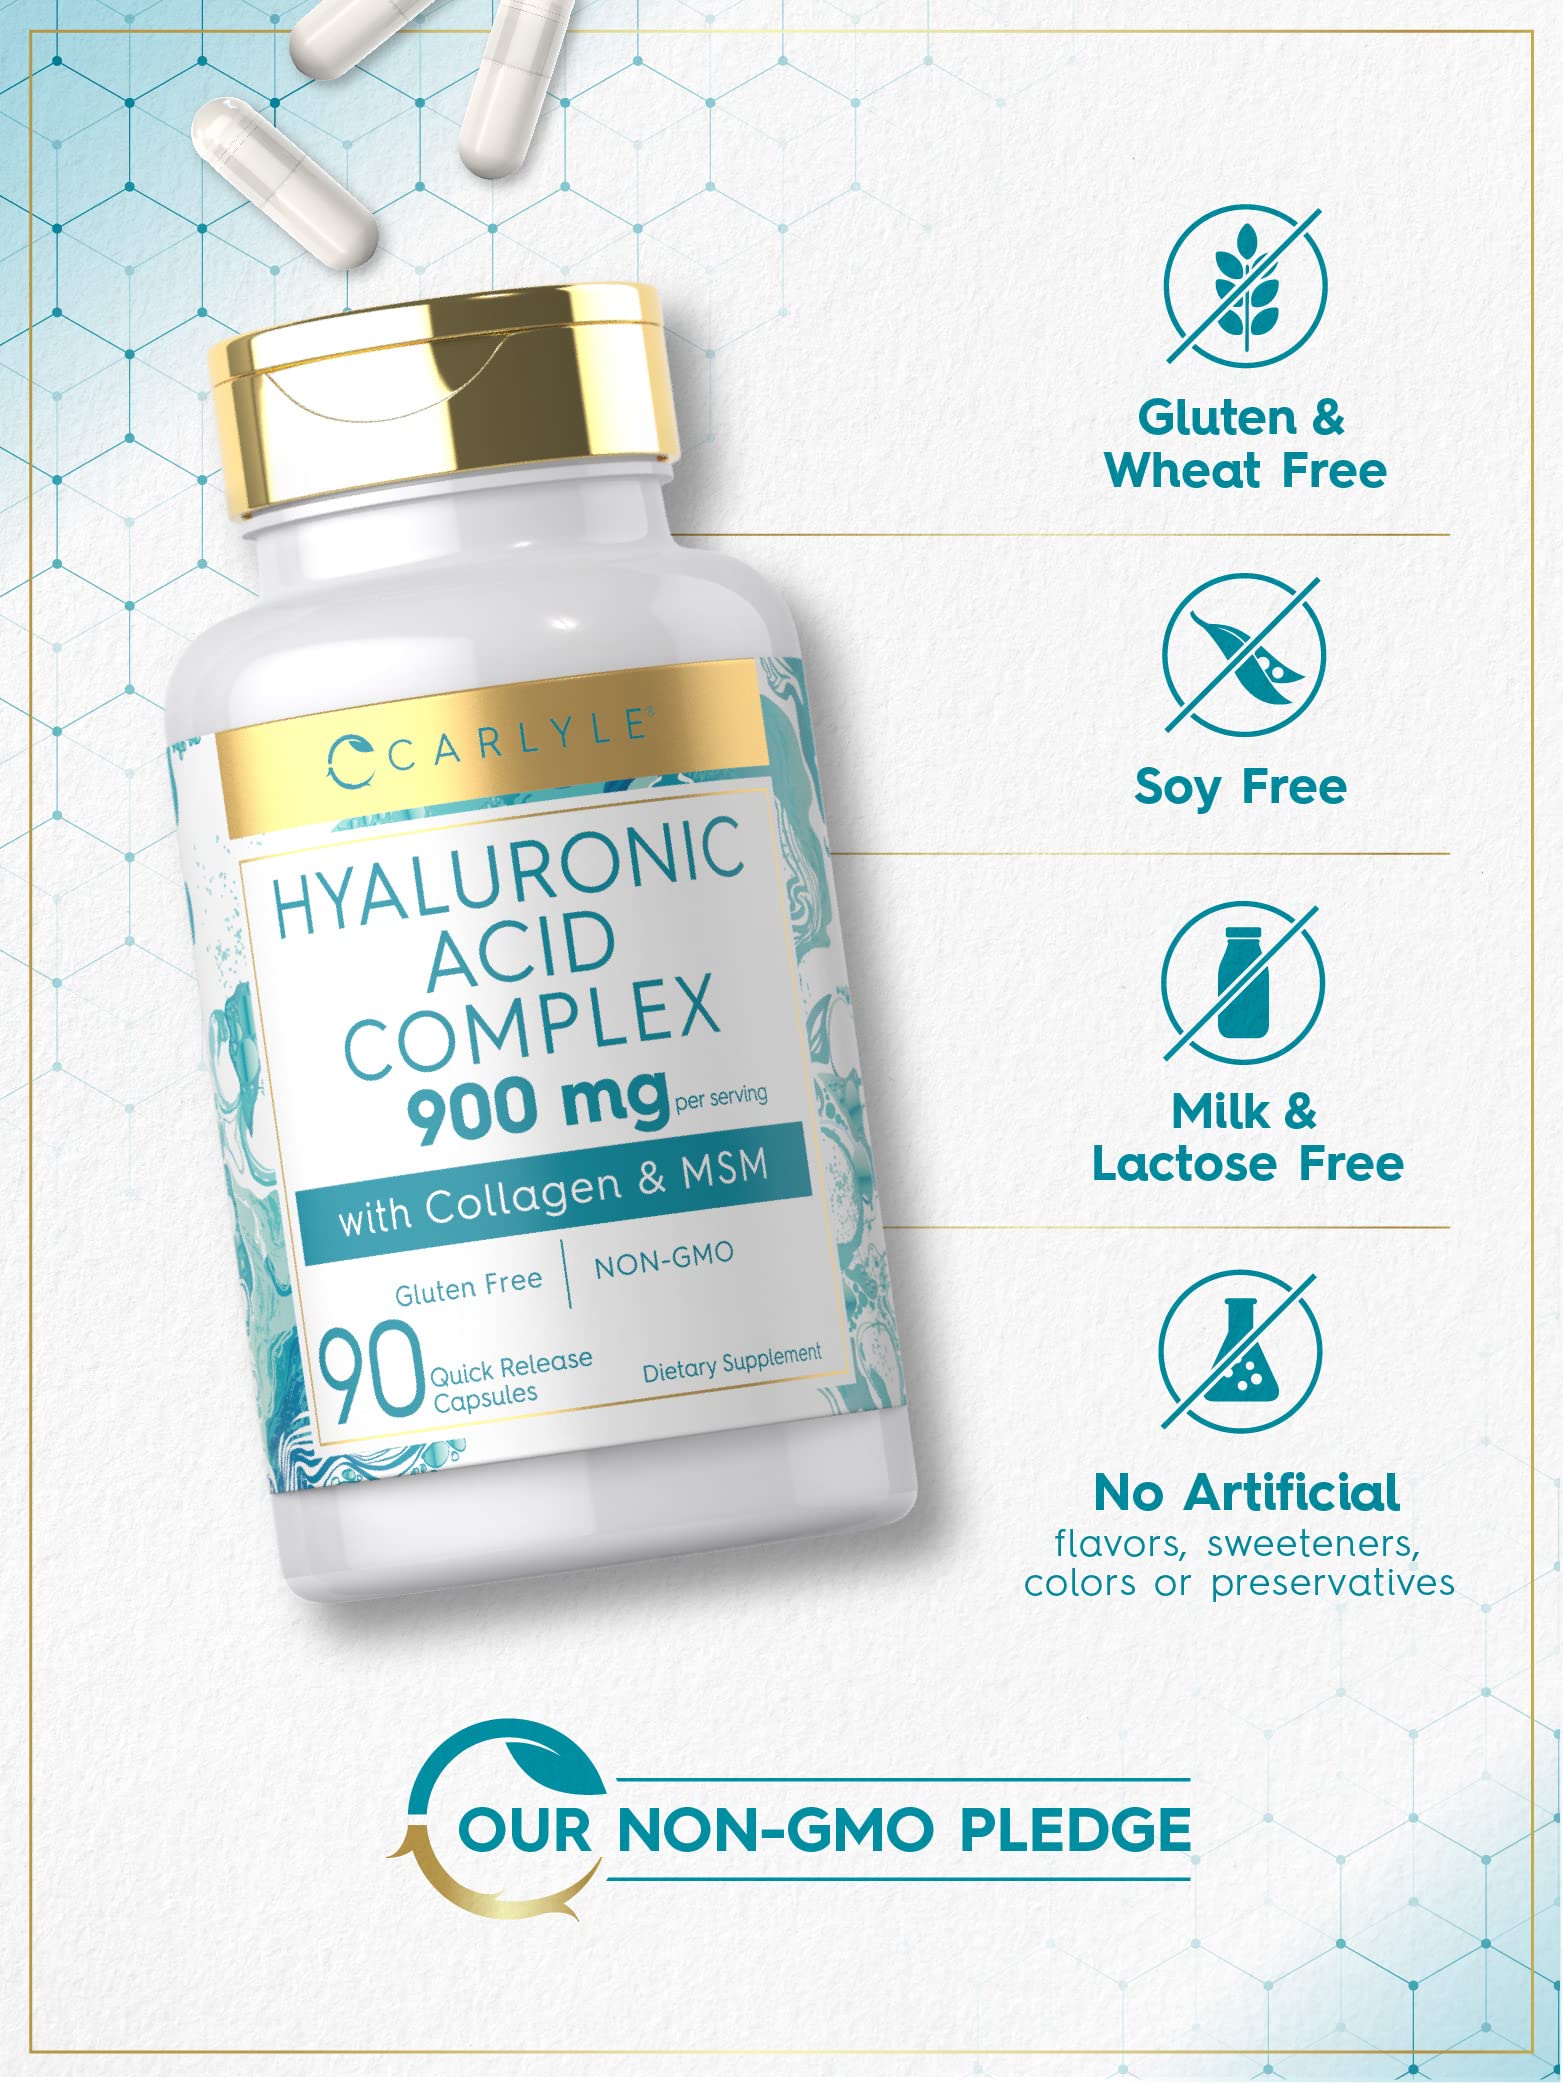 Carlyle Collagen with Hyaluronic Acid 900mg | 90 Capsules | with MSM | Hydrolyzed Collagen Complex | Non-GMO, Gluten Free Supplement